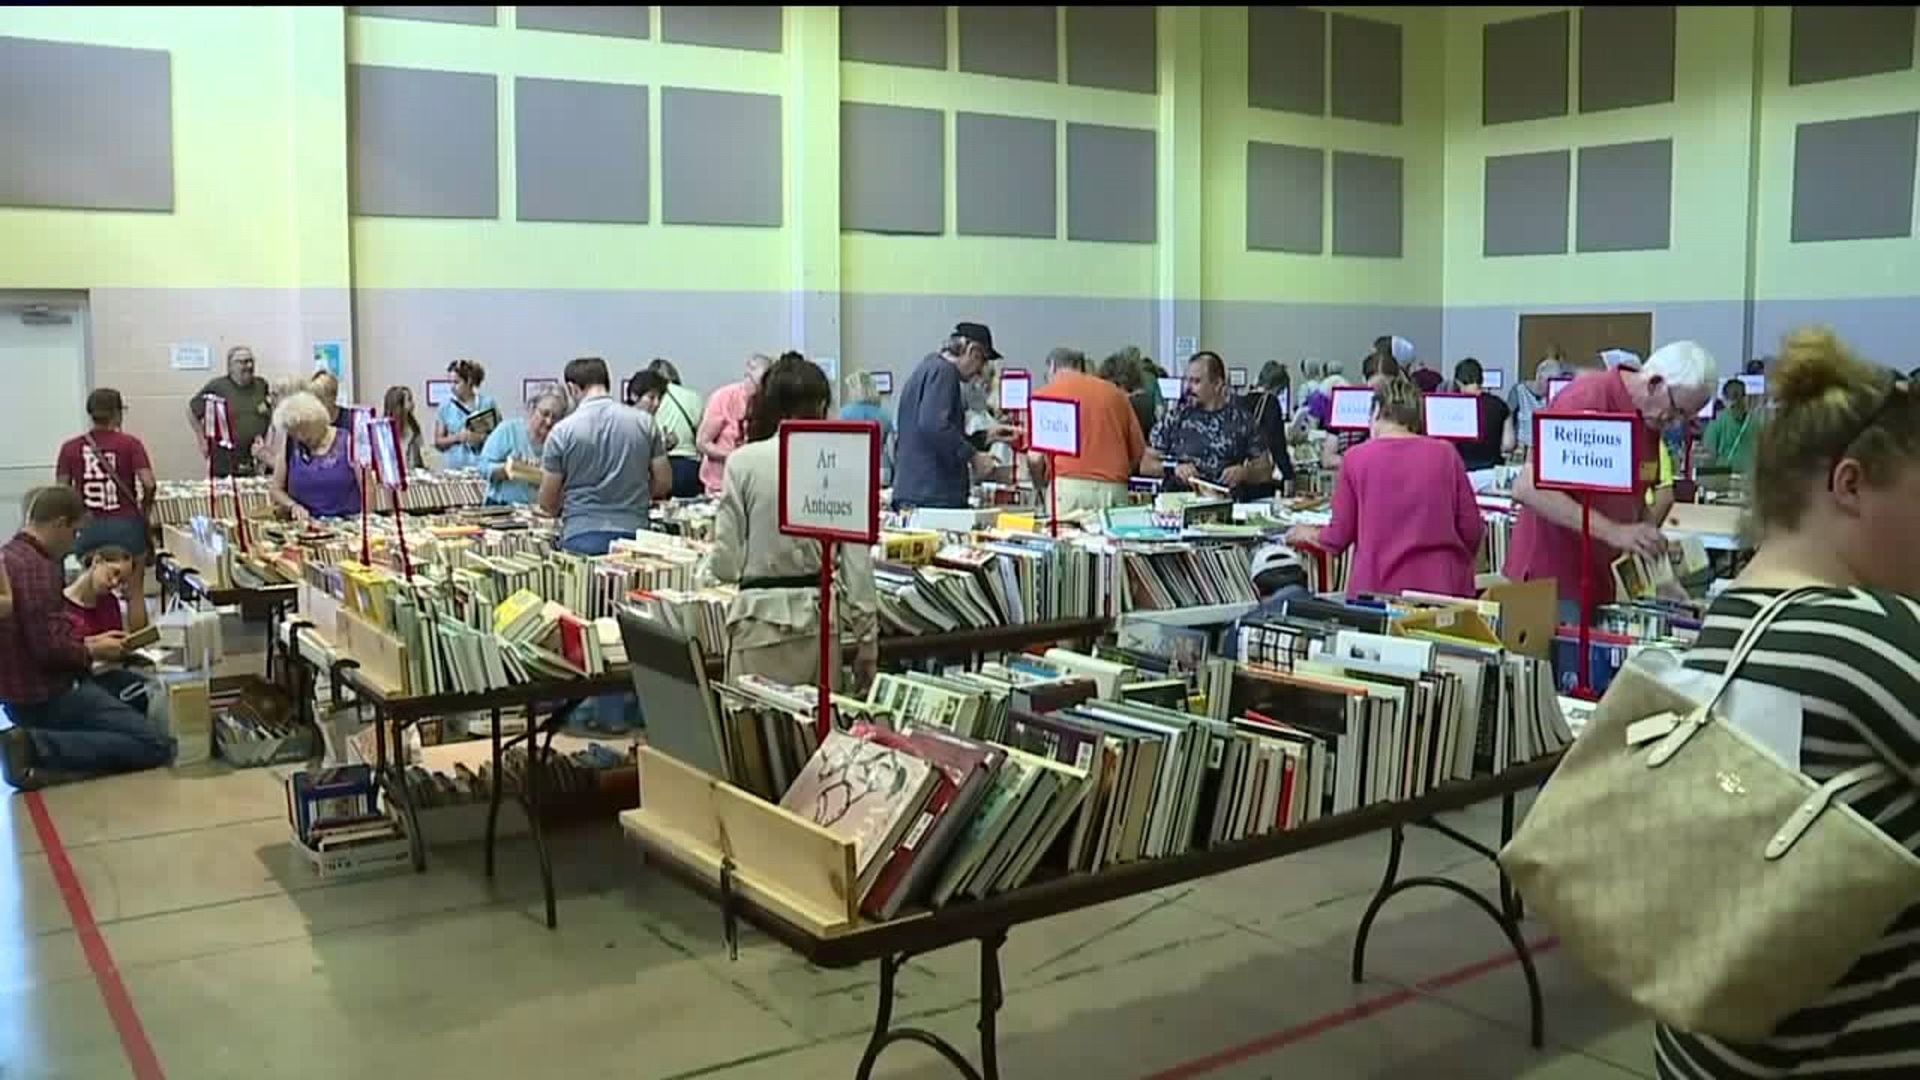 Thousands of Books for Sale at Big Library Fundraiser